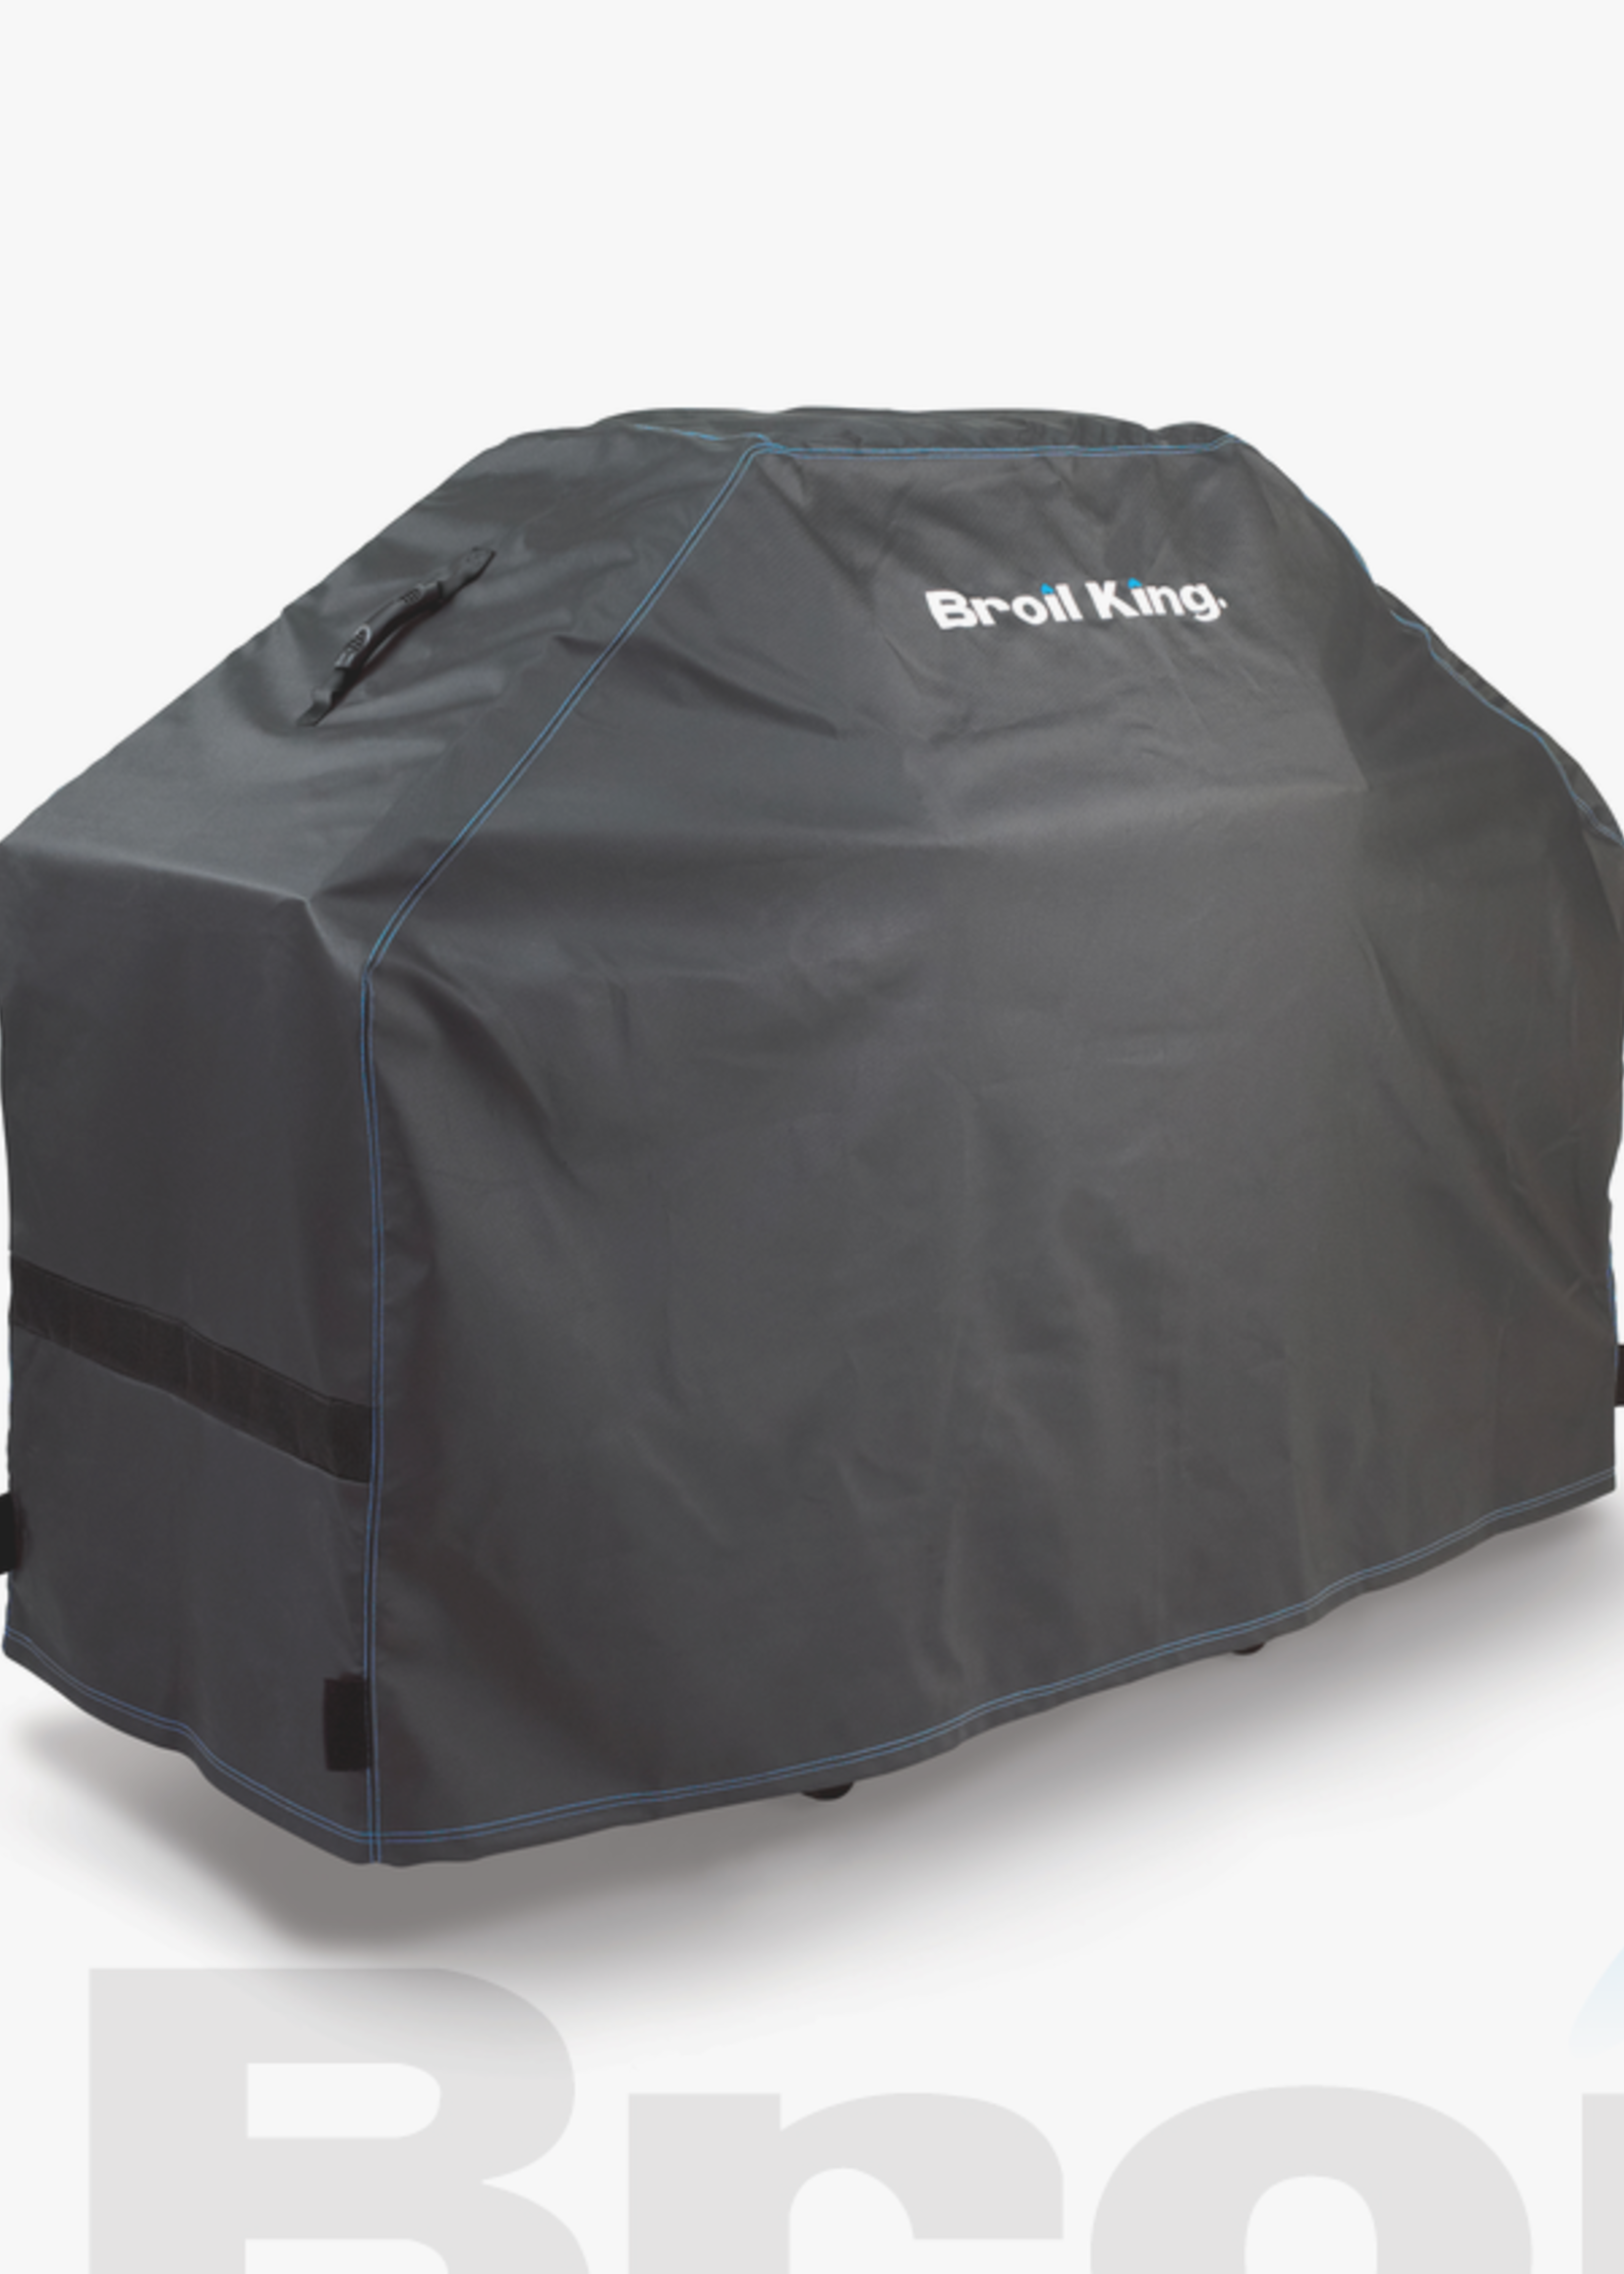 Broil King Broil King Premium Grill Cover- Baron 500